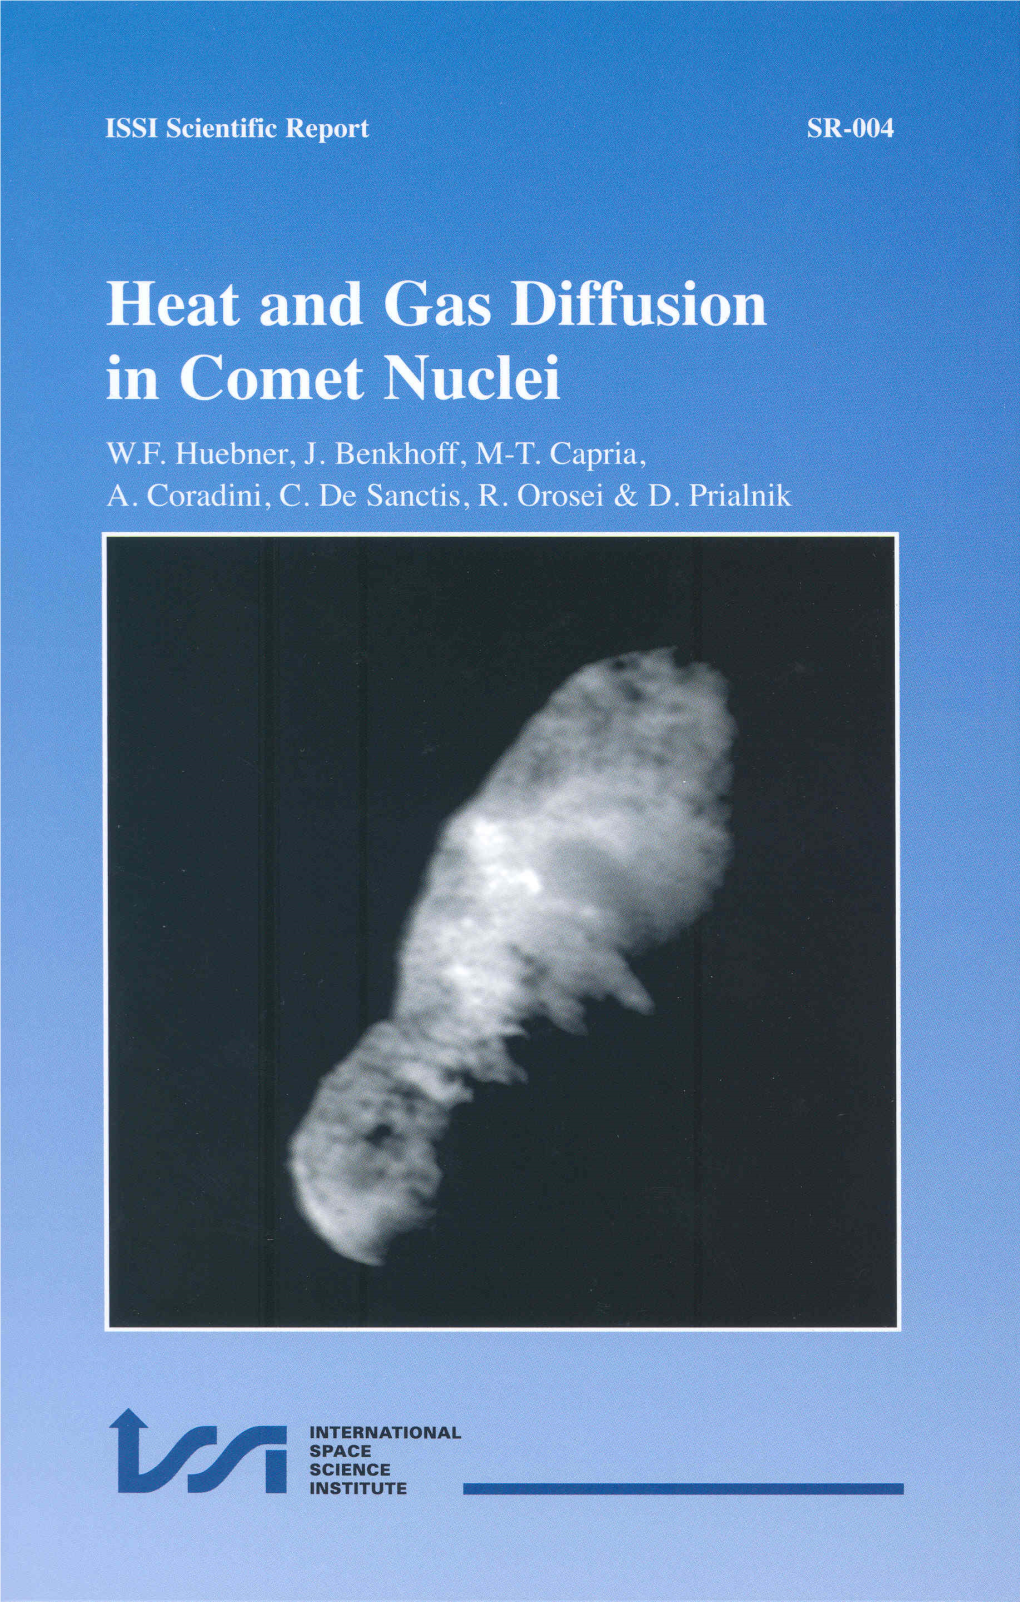 Heat and Gas Diffusion in Comet Nuclei